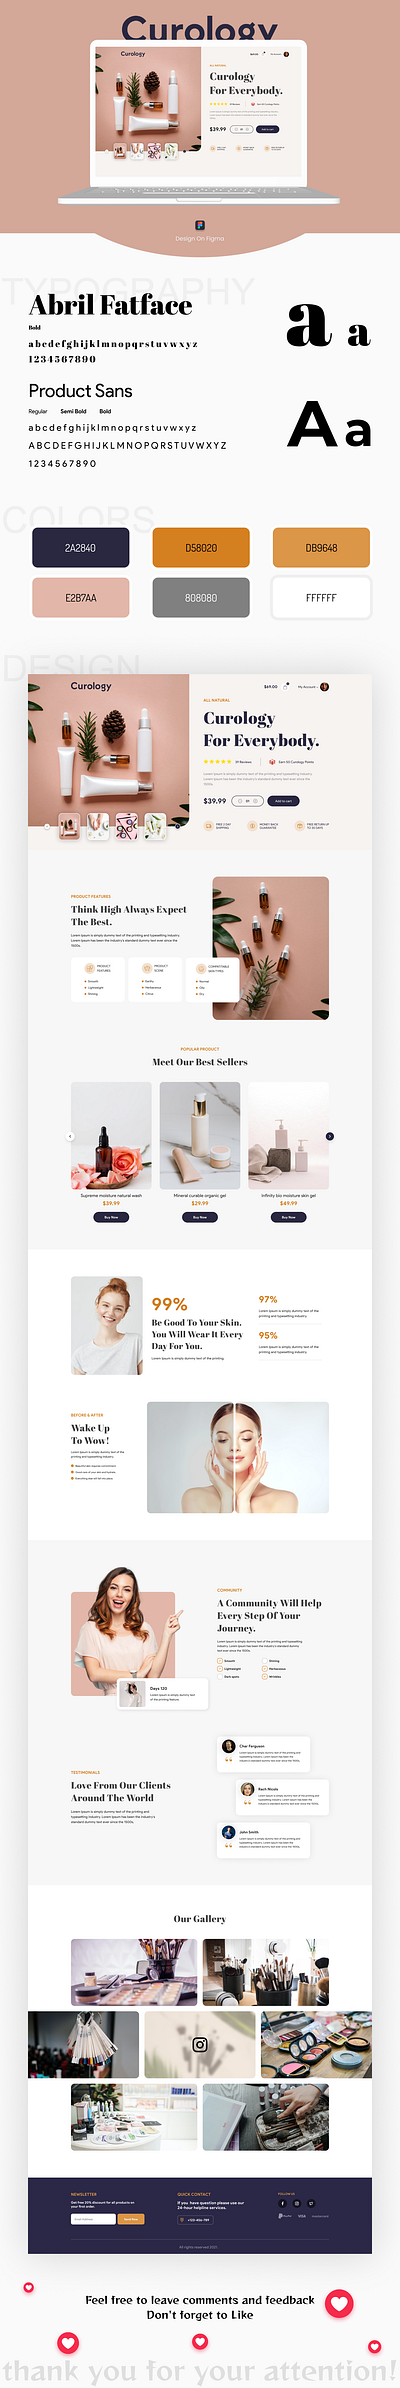 Curology | Beauty Products Website Landing Page figma